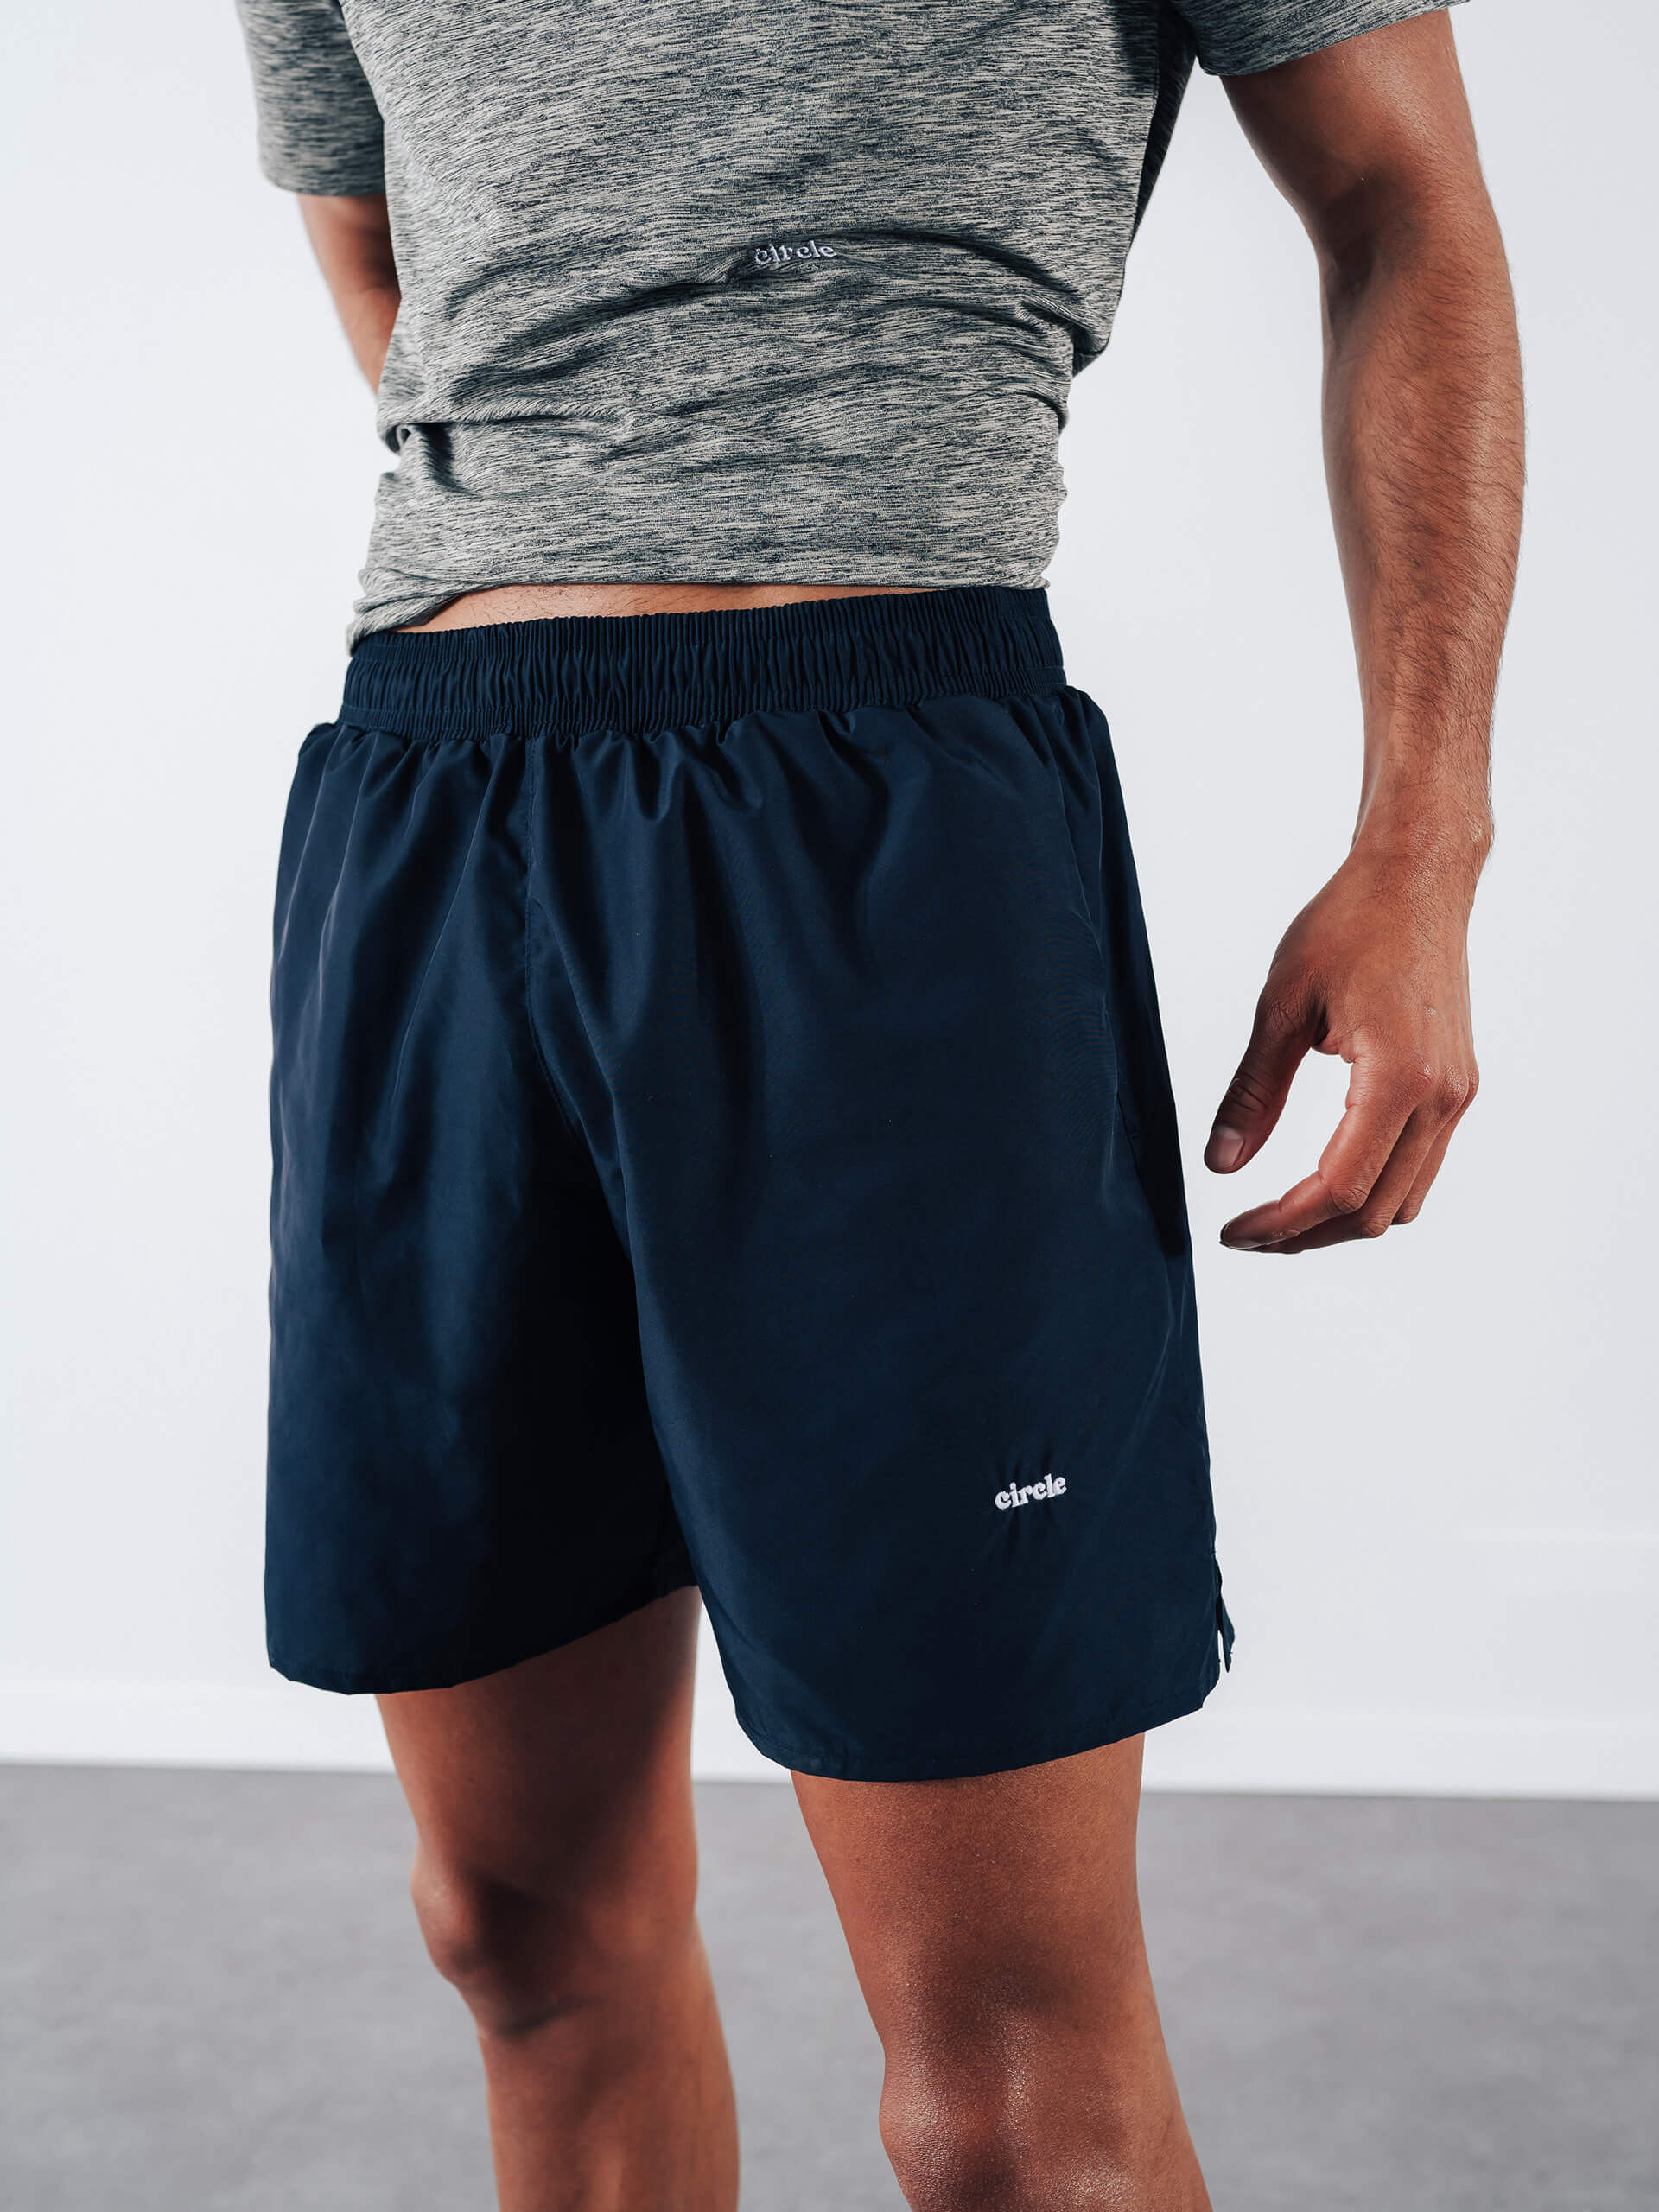 Circle Sportswear Sport One For All - Running shorts - Men's